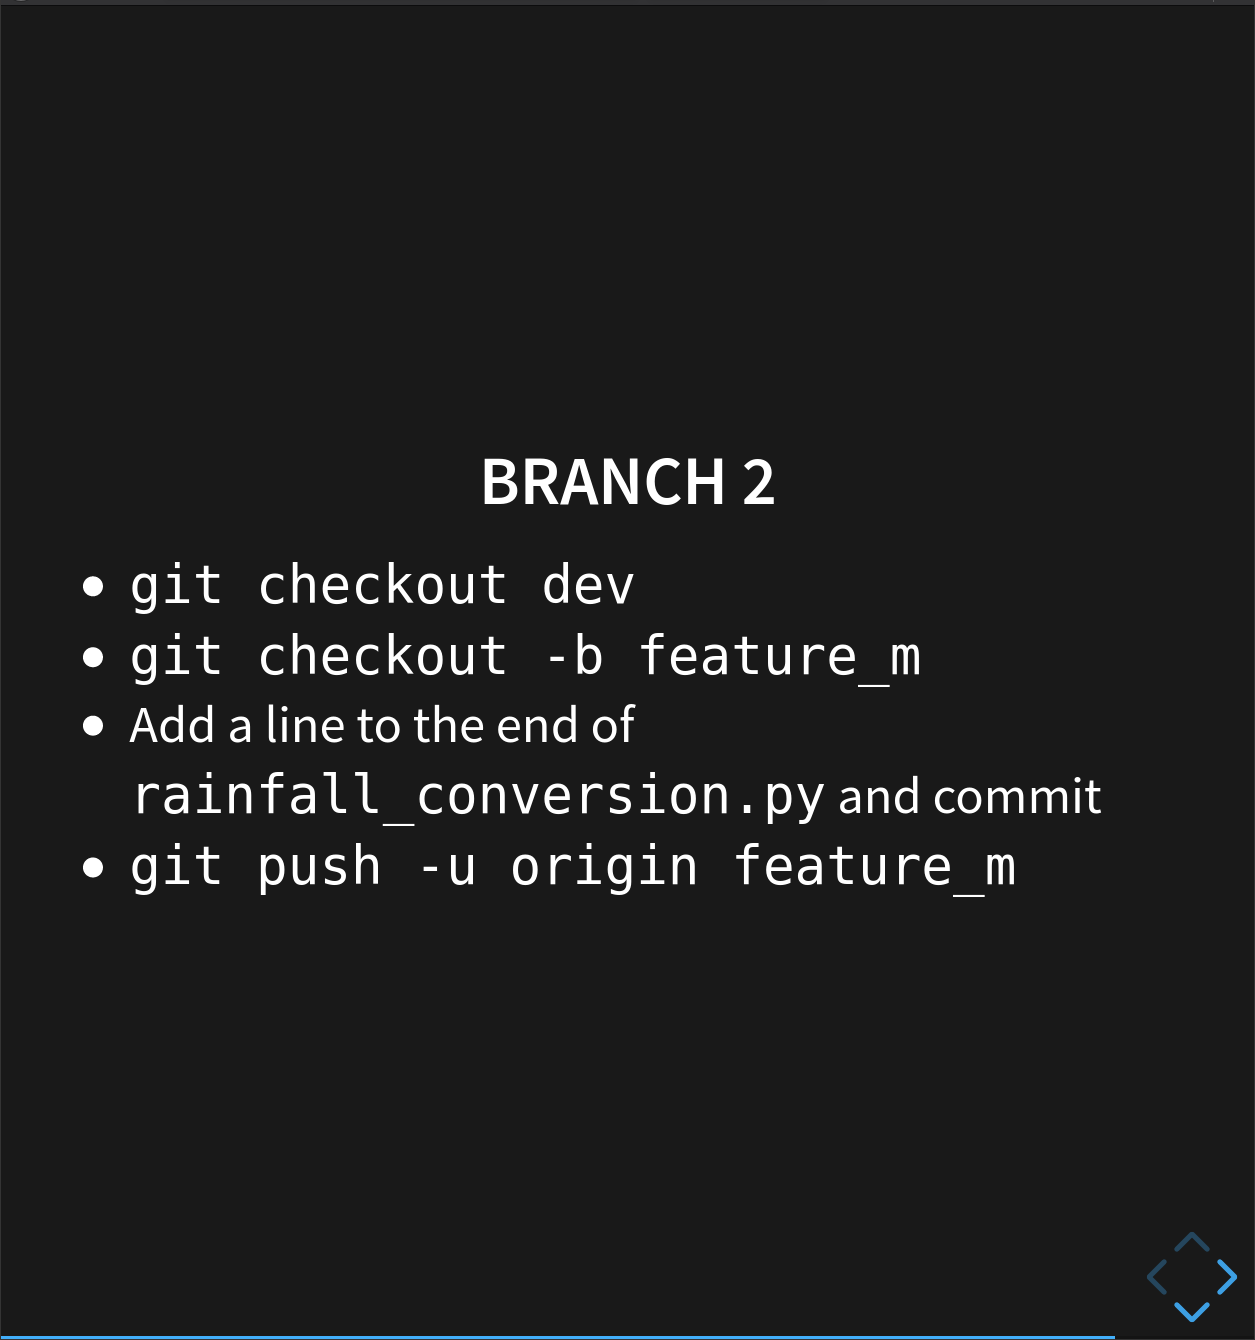 Second branch changes